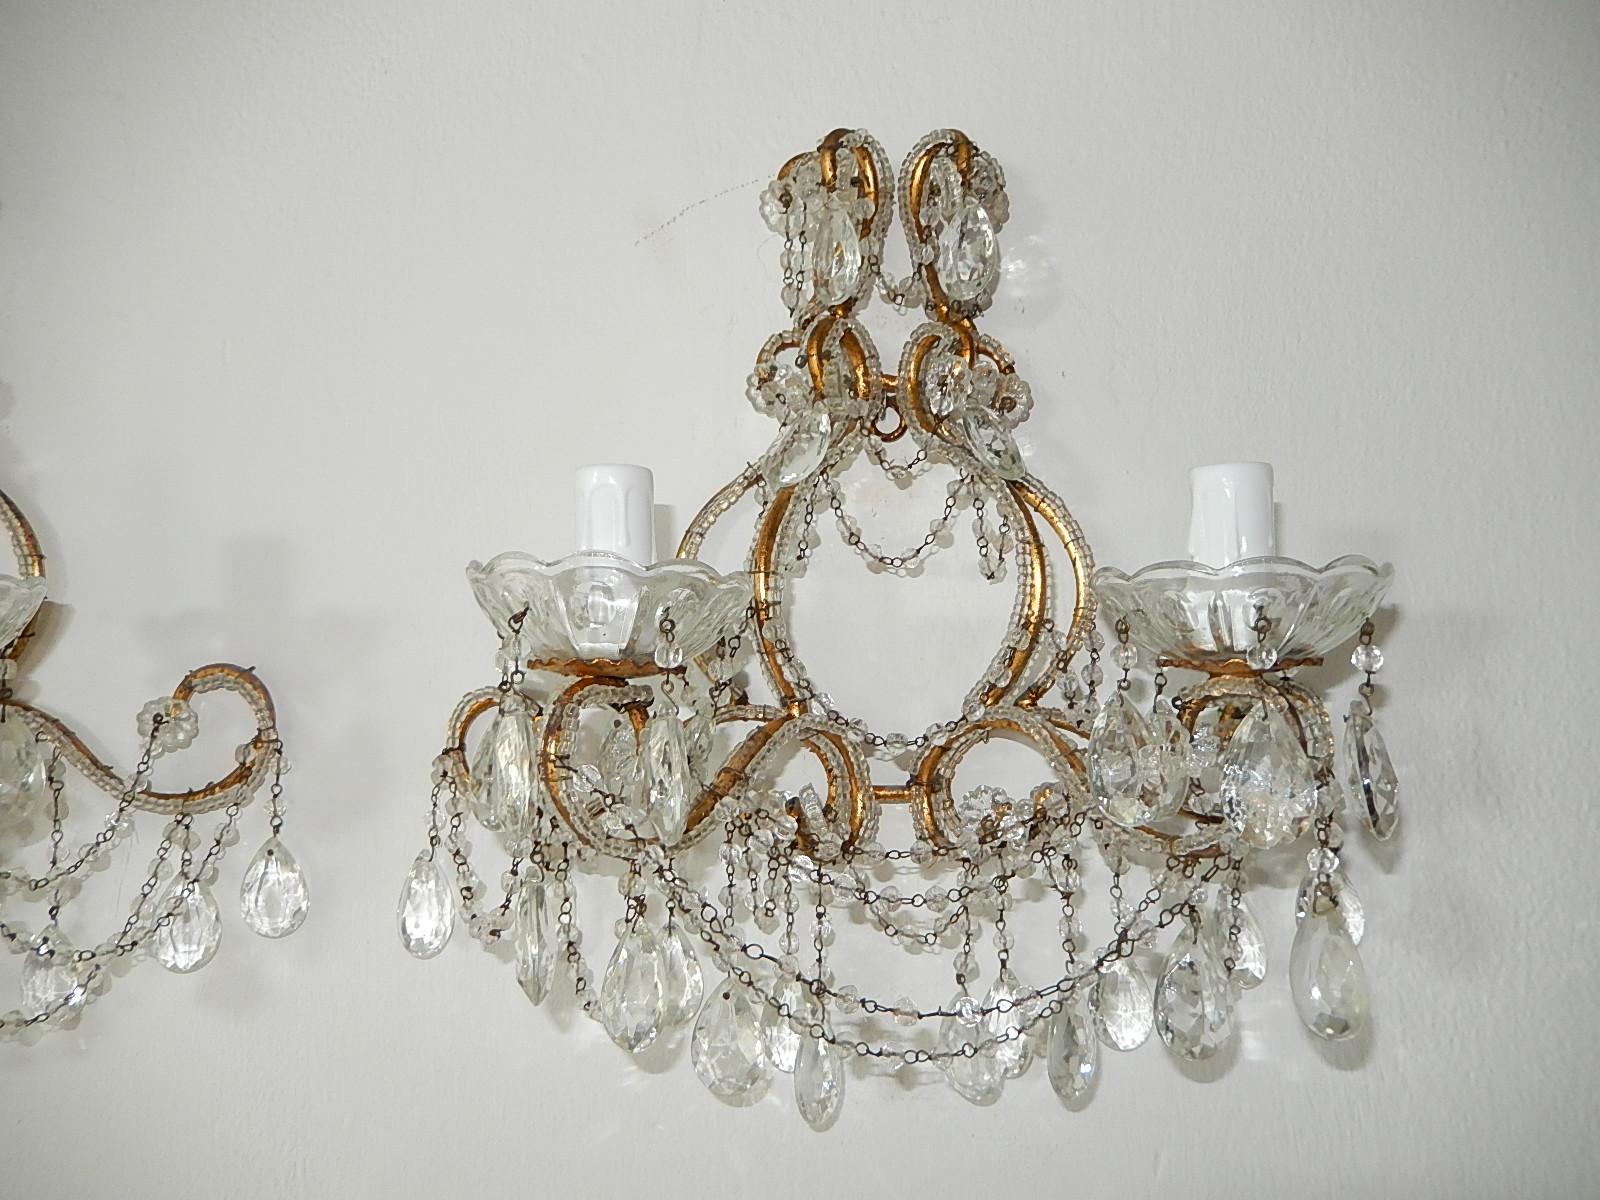 Murano Glass 1900 Italian Rococo Beaded Crystal Prisms Gold Gilt Sconces For Sale